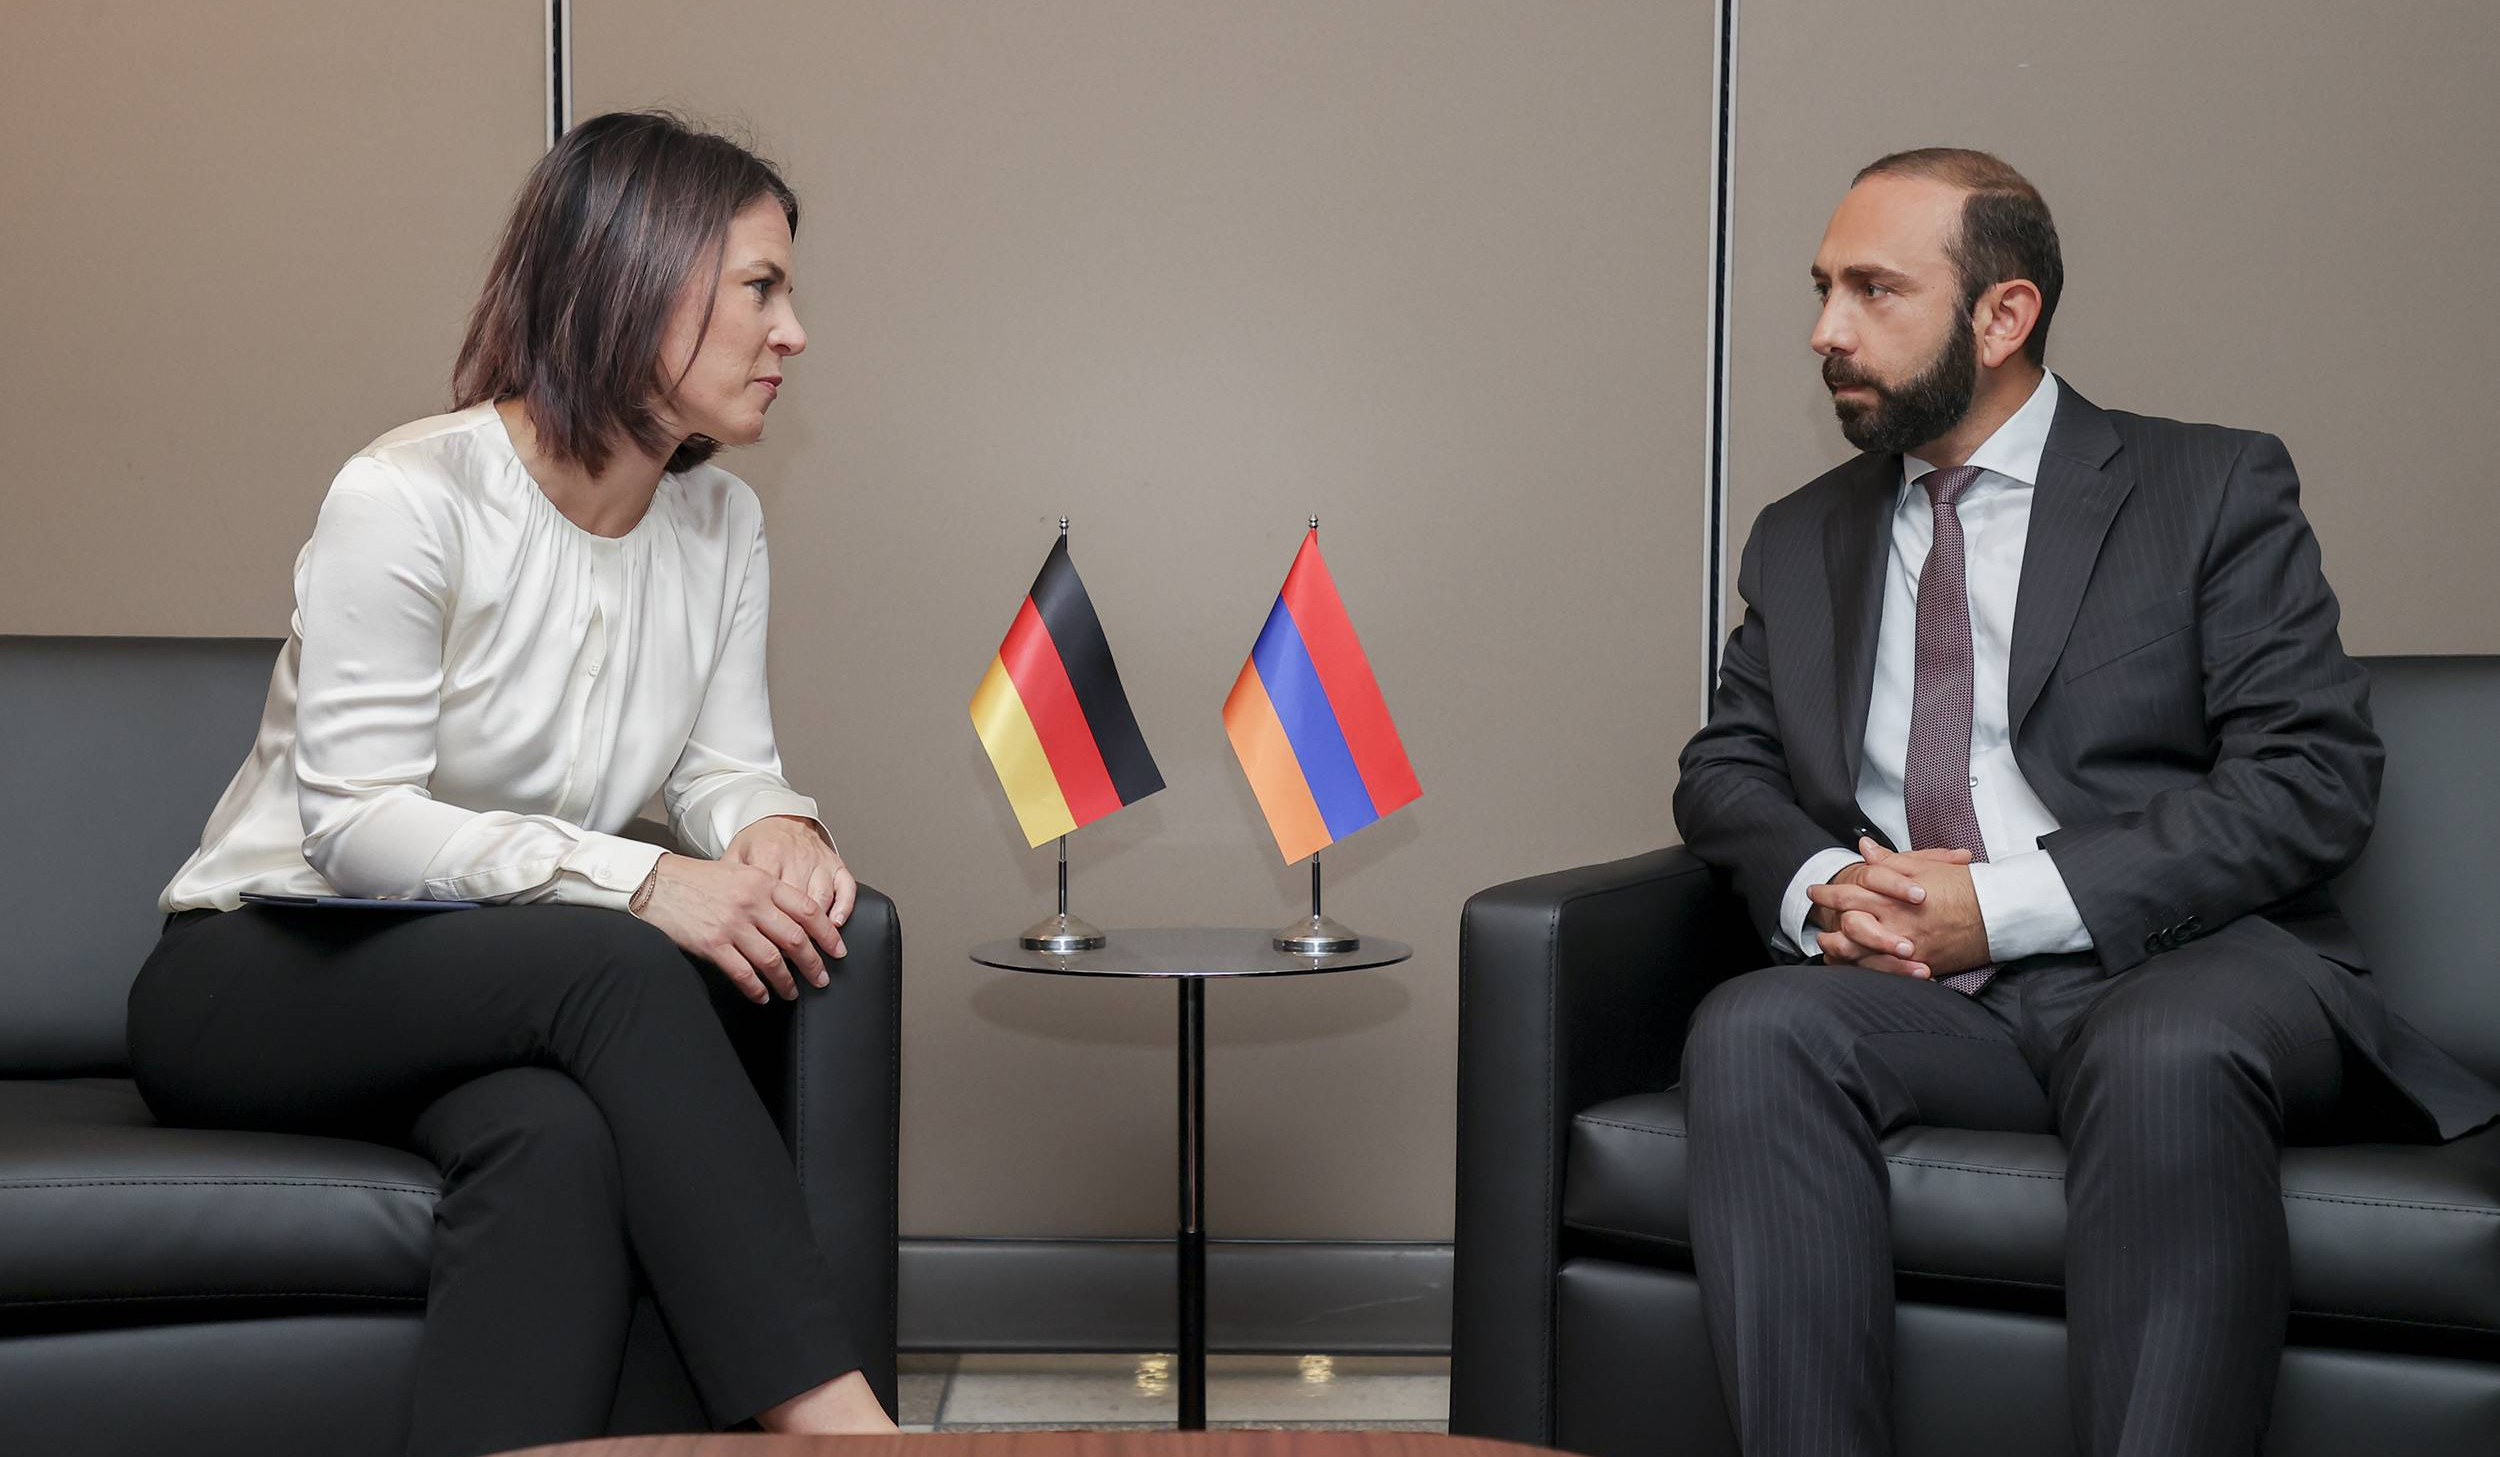 At meeting with his German counterpart, Ararat Mirzoyan emphasized imperative of crime prevention in Nagorno-Karabakh